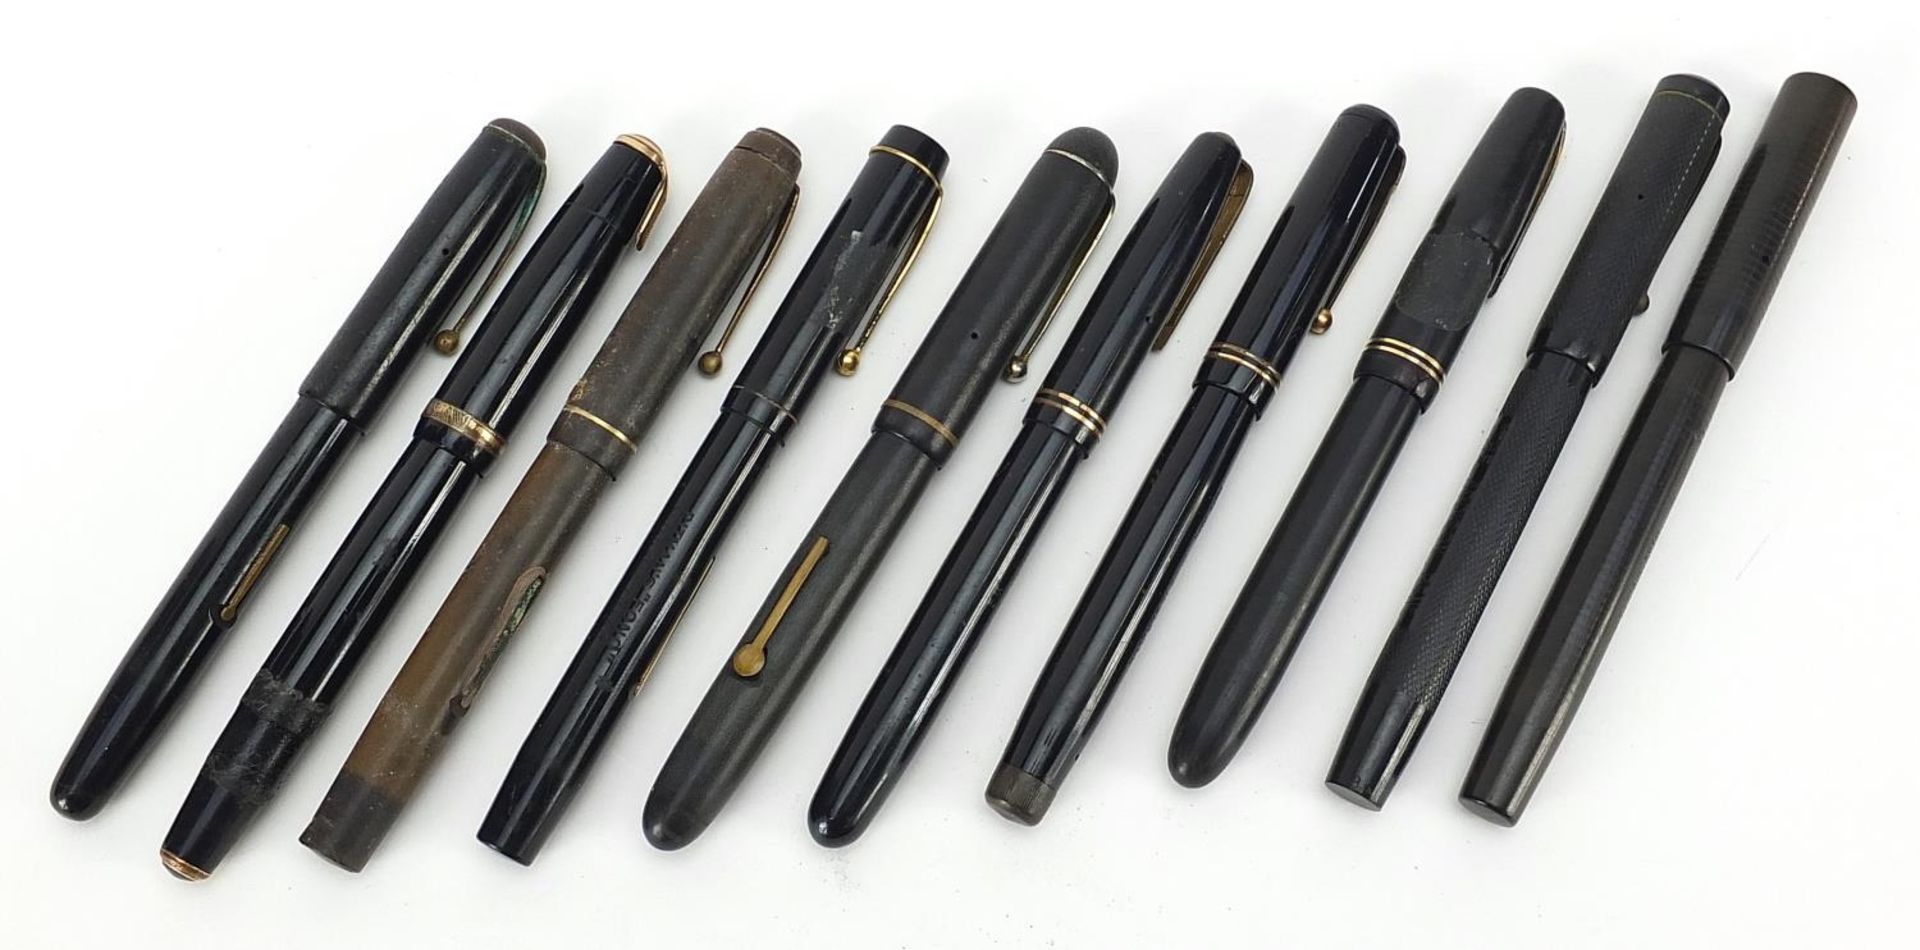 Ten vintage fountain pens with gold nibs including Swan self filler, Burnham, Watermans and Parker